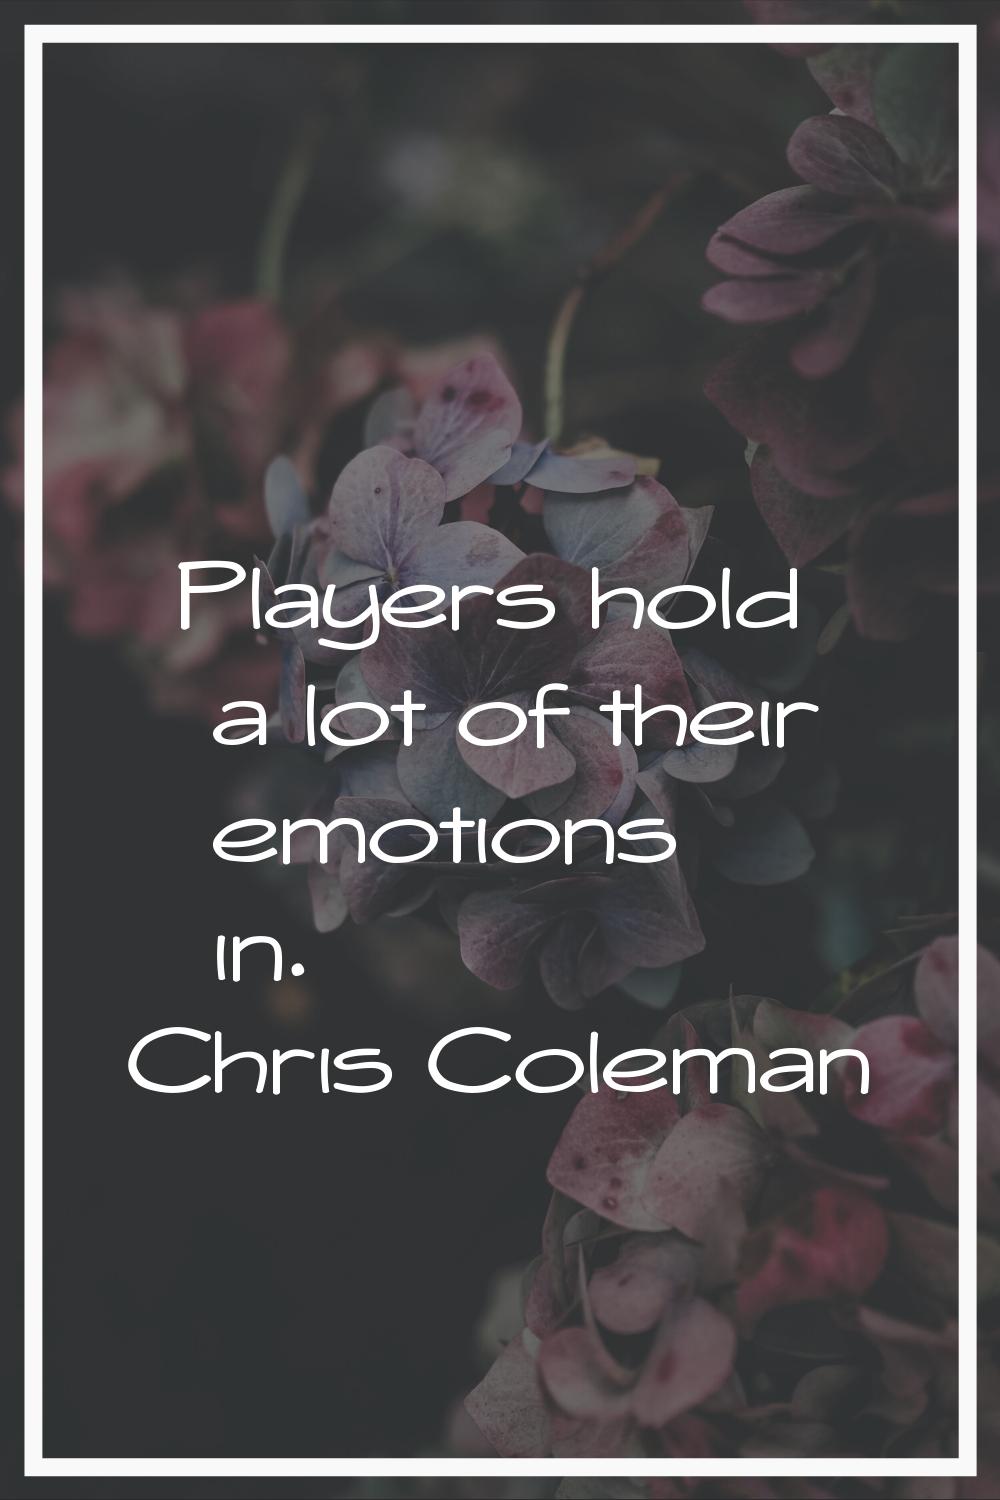 Players hold a lot of their emotions in.